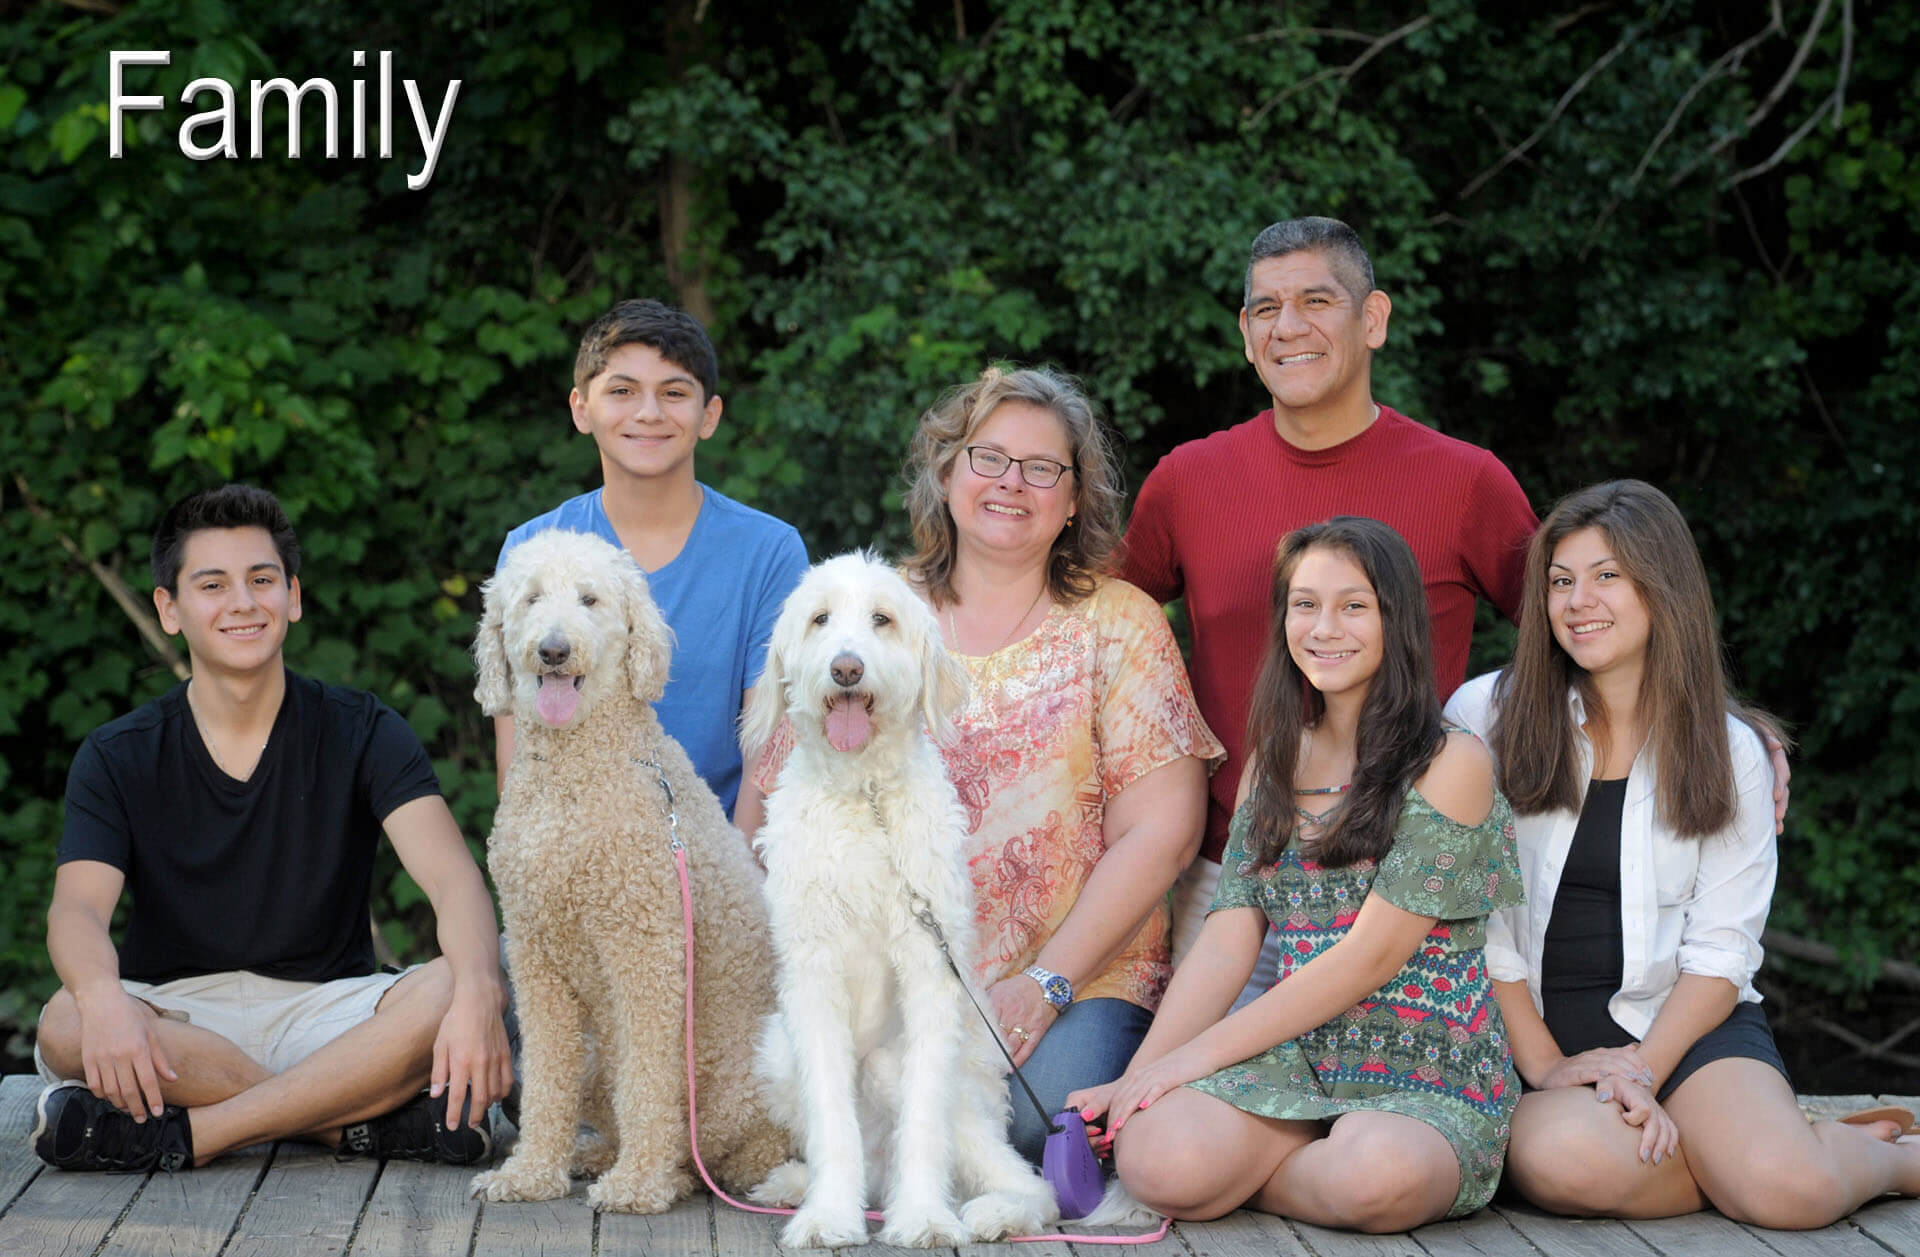 A Troy, Michigan family poses with their dogs in Auburn Hills, Michigan during their family photography session.